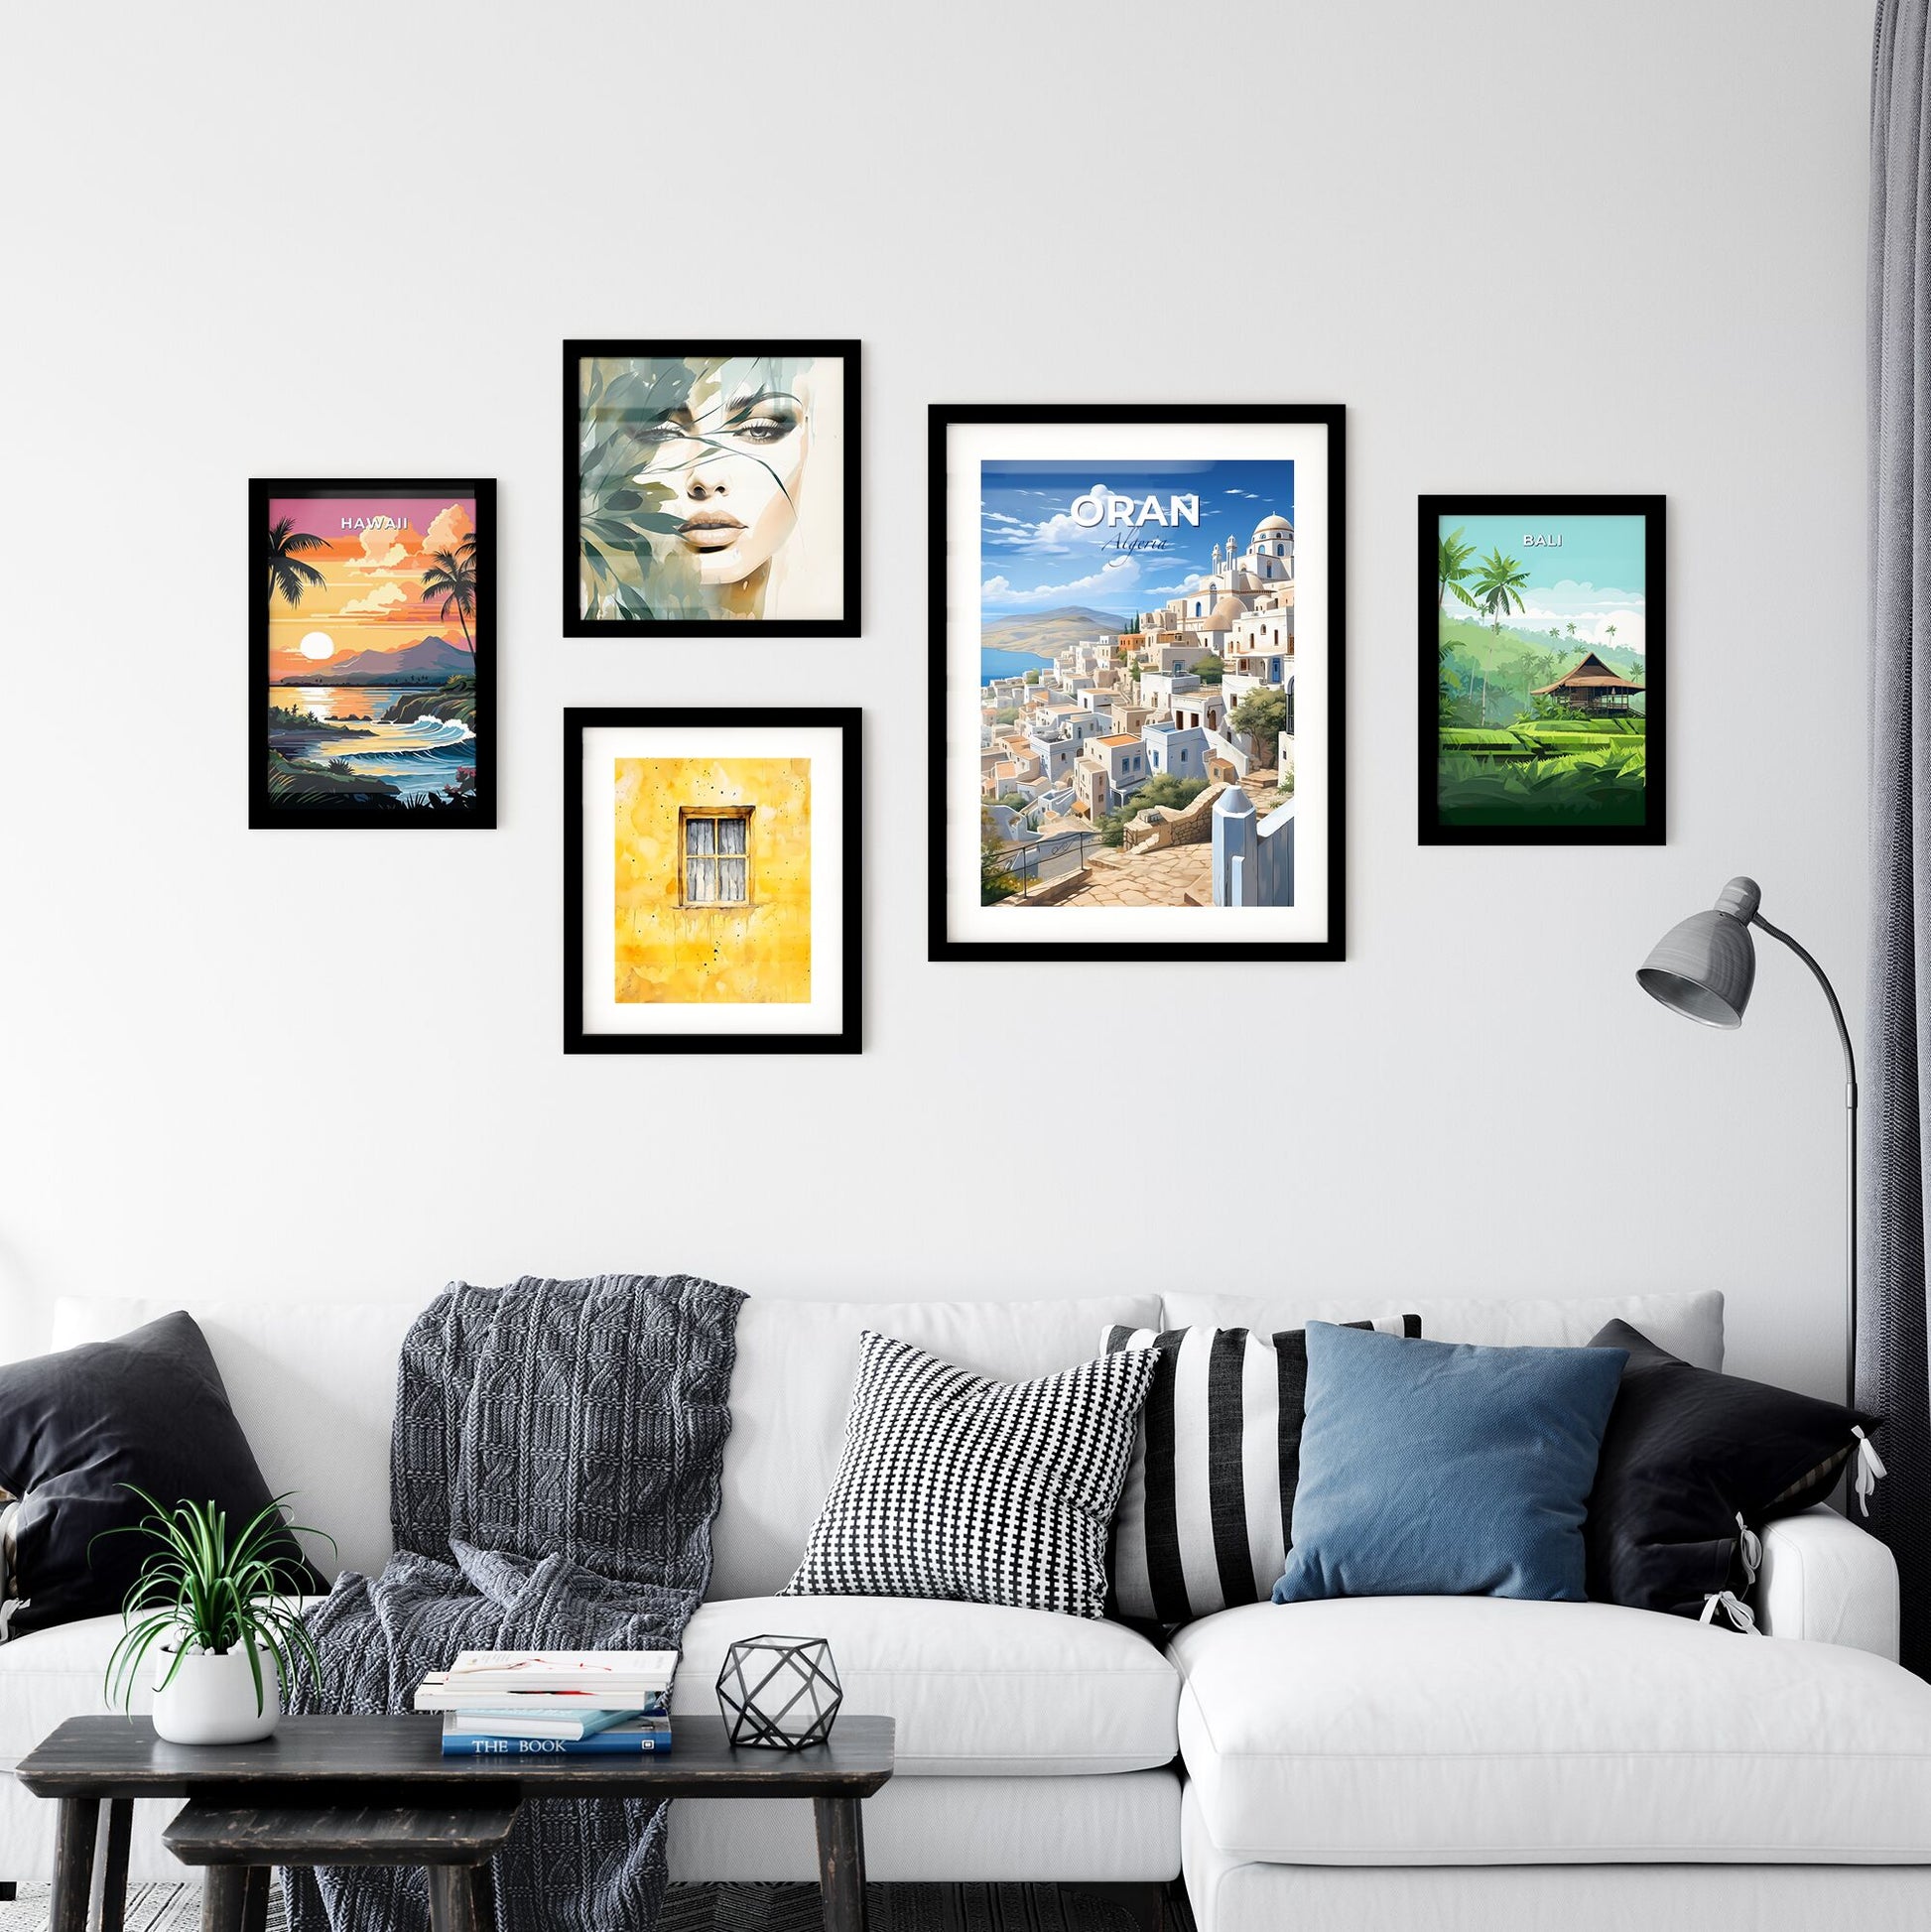 Vibrant Oran Algeria Skyline Painting Depicting White Buildings on a Hill by the Water Default Title